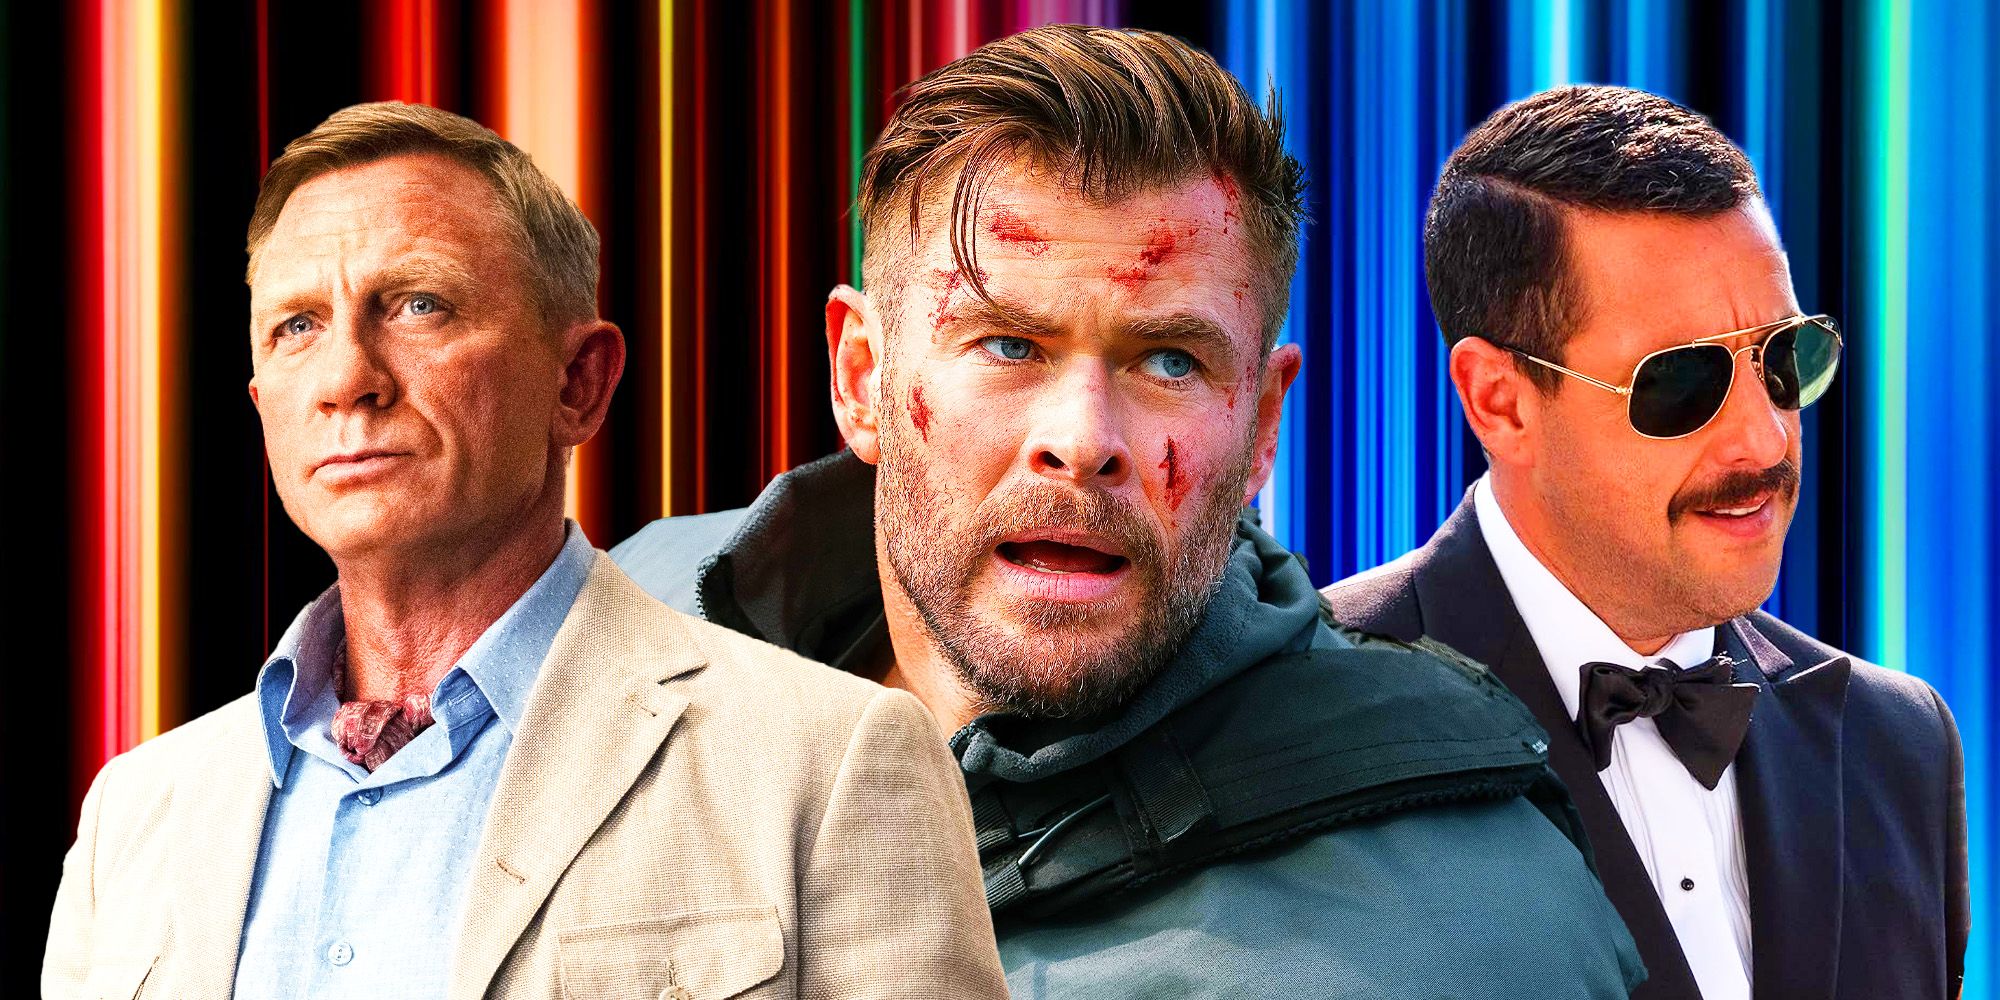 Daniel Craig in Knives Out, Chris Hemsworth in Extraction 2, and Adam Sandler in Murder Mystery